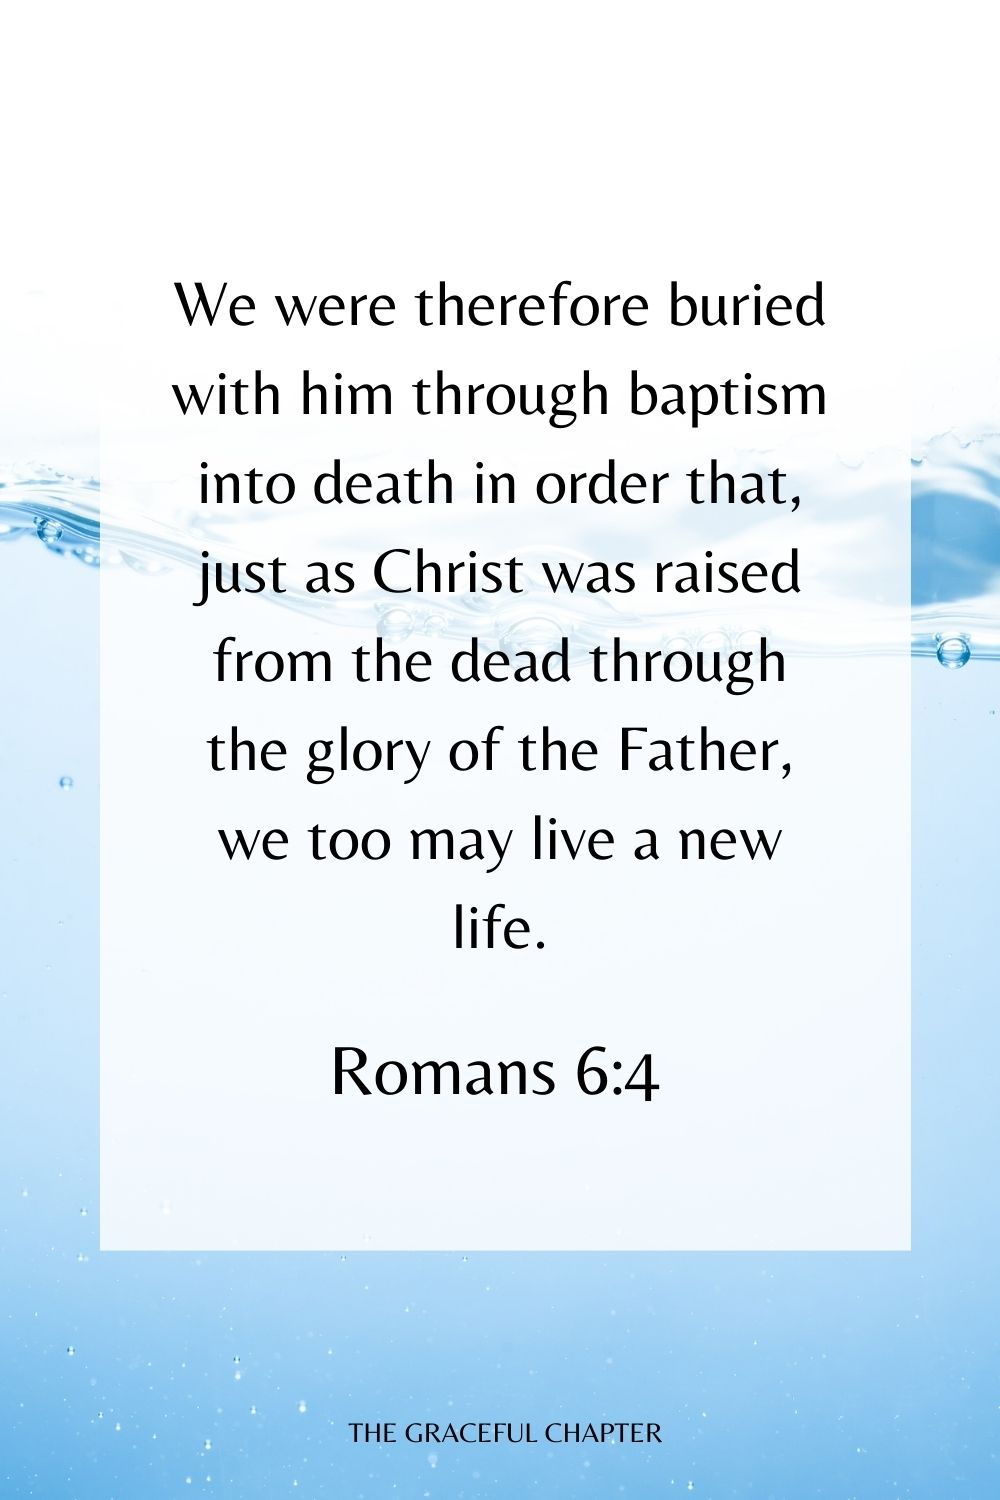 We were therefore buried with him through baptism into death in order that, just as Christ was raised from the dead through the glory of the Father, we too may live a new life. Romans 6:4